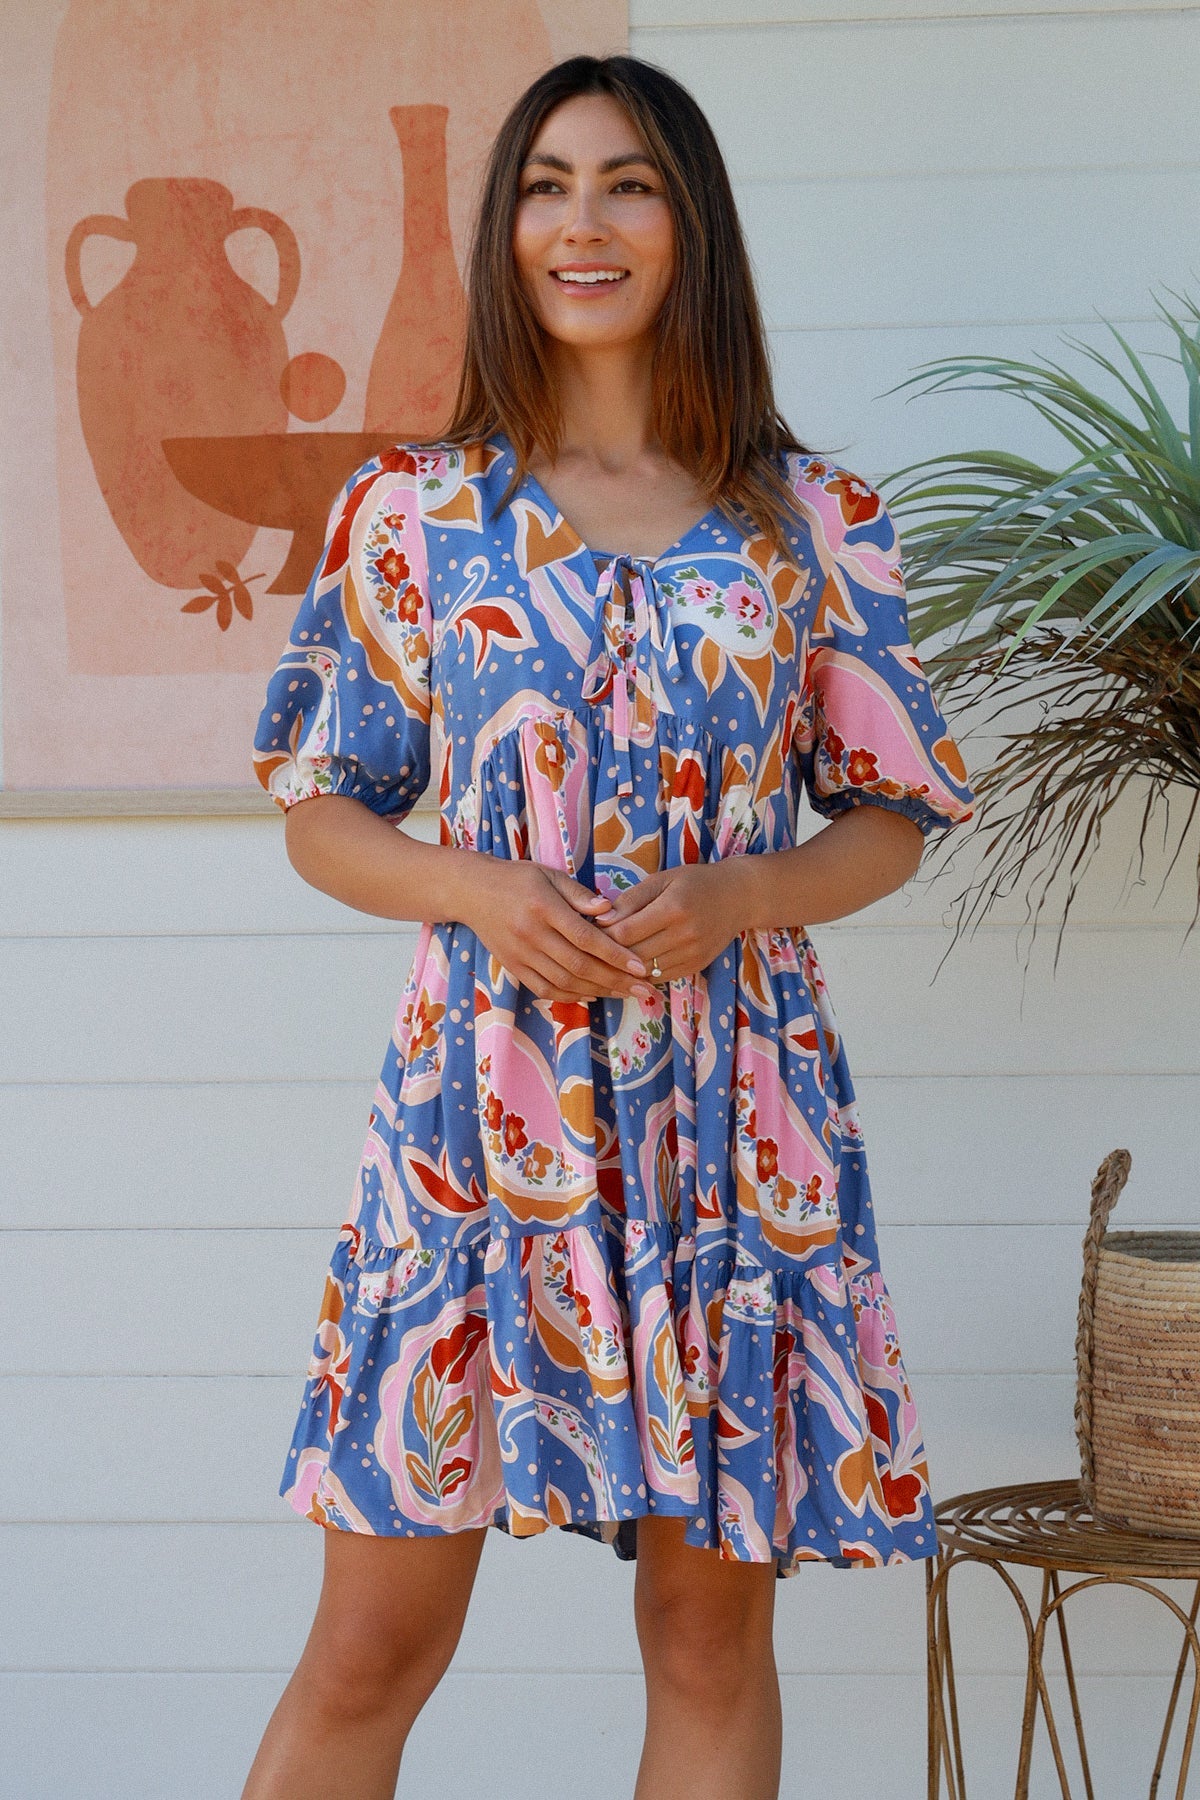 Put the sunshine back into your wardrobe with the Lila Mini Dress! With elasticated sleeves, drawstring tie up and tiered style, this cute dress is sure to be a show-stopper on your next night out. Let your inner ray of light shine, and look fabulous in Lila! 🌞